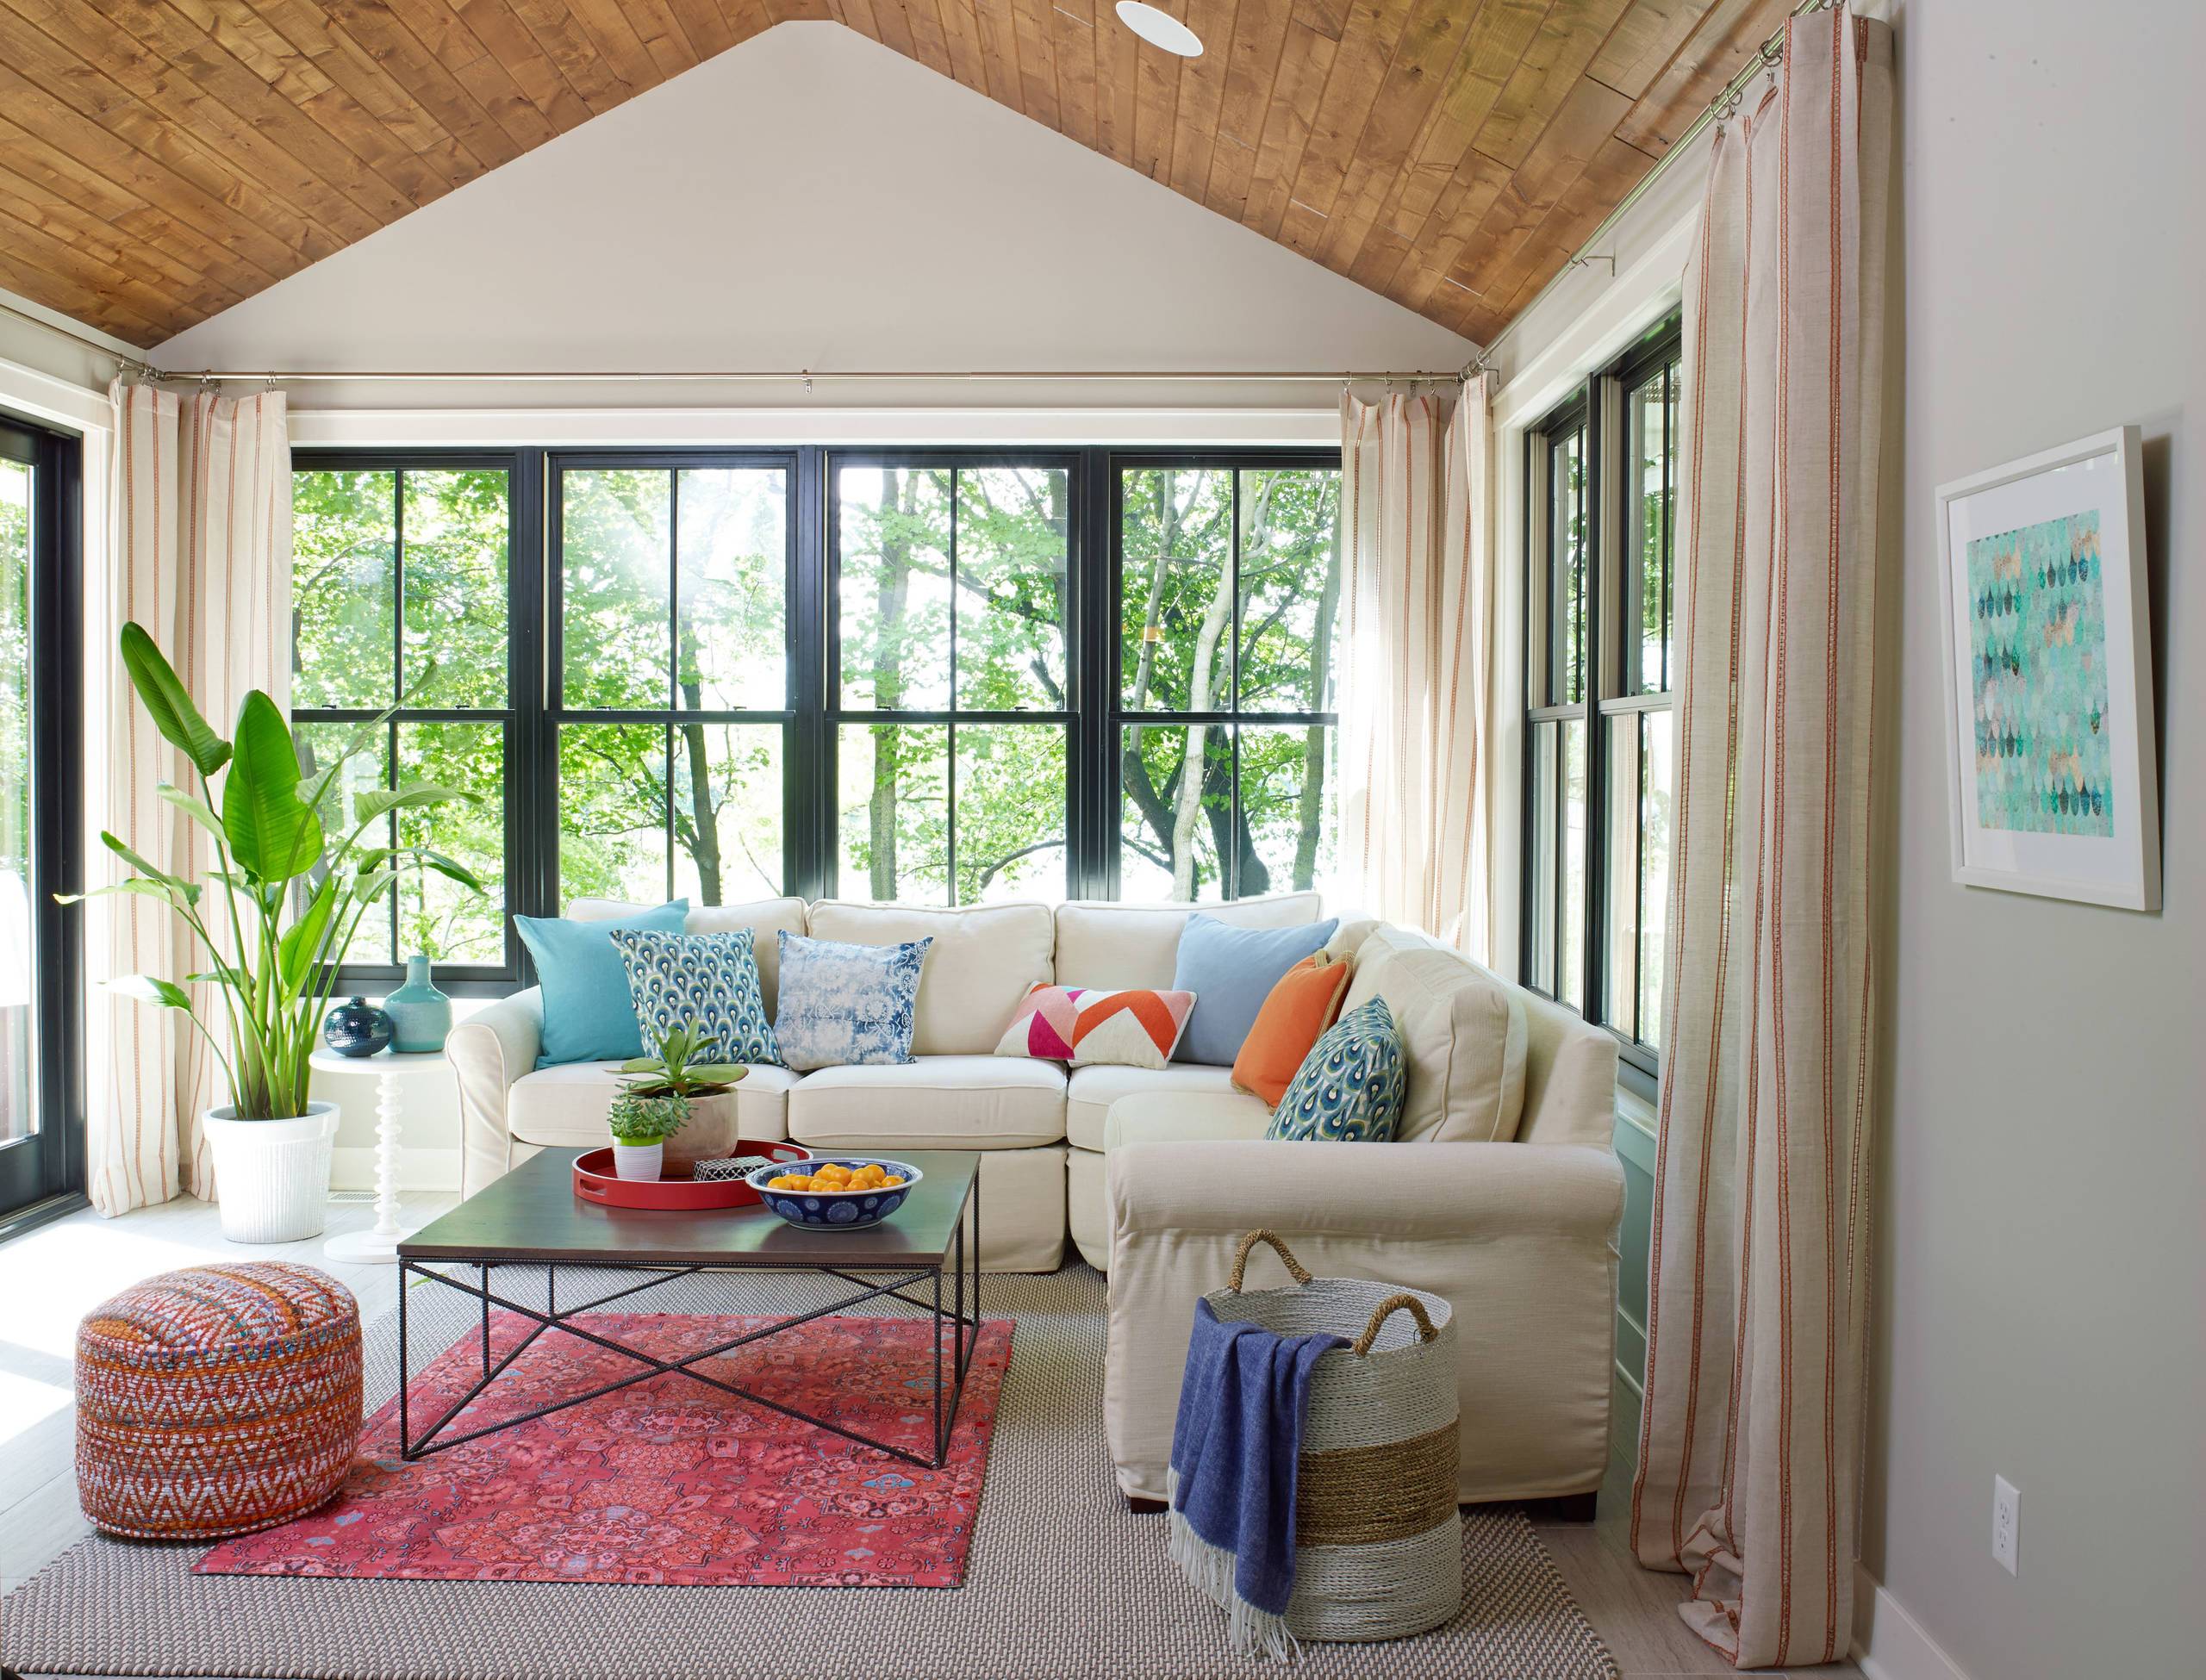 A pop of color for a charming sunroom (from Houzz)